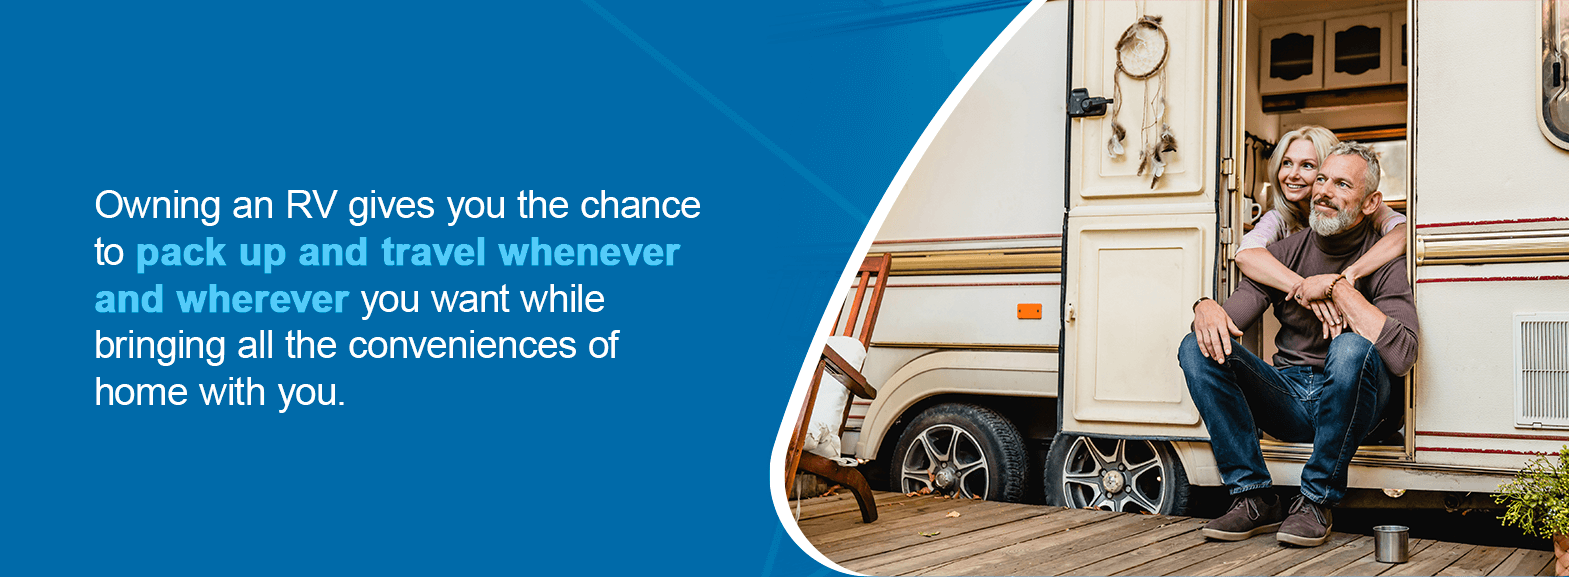 Owning an RV gives you the chance to pack up and travel whenever and wherever you want while bringing all the conveniences of home with you.